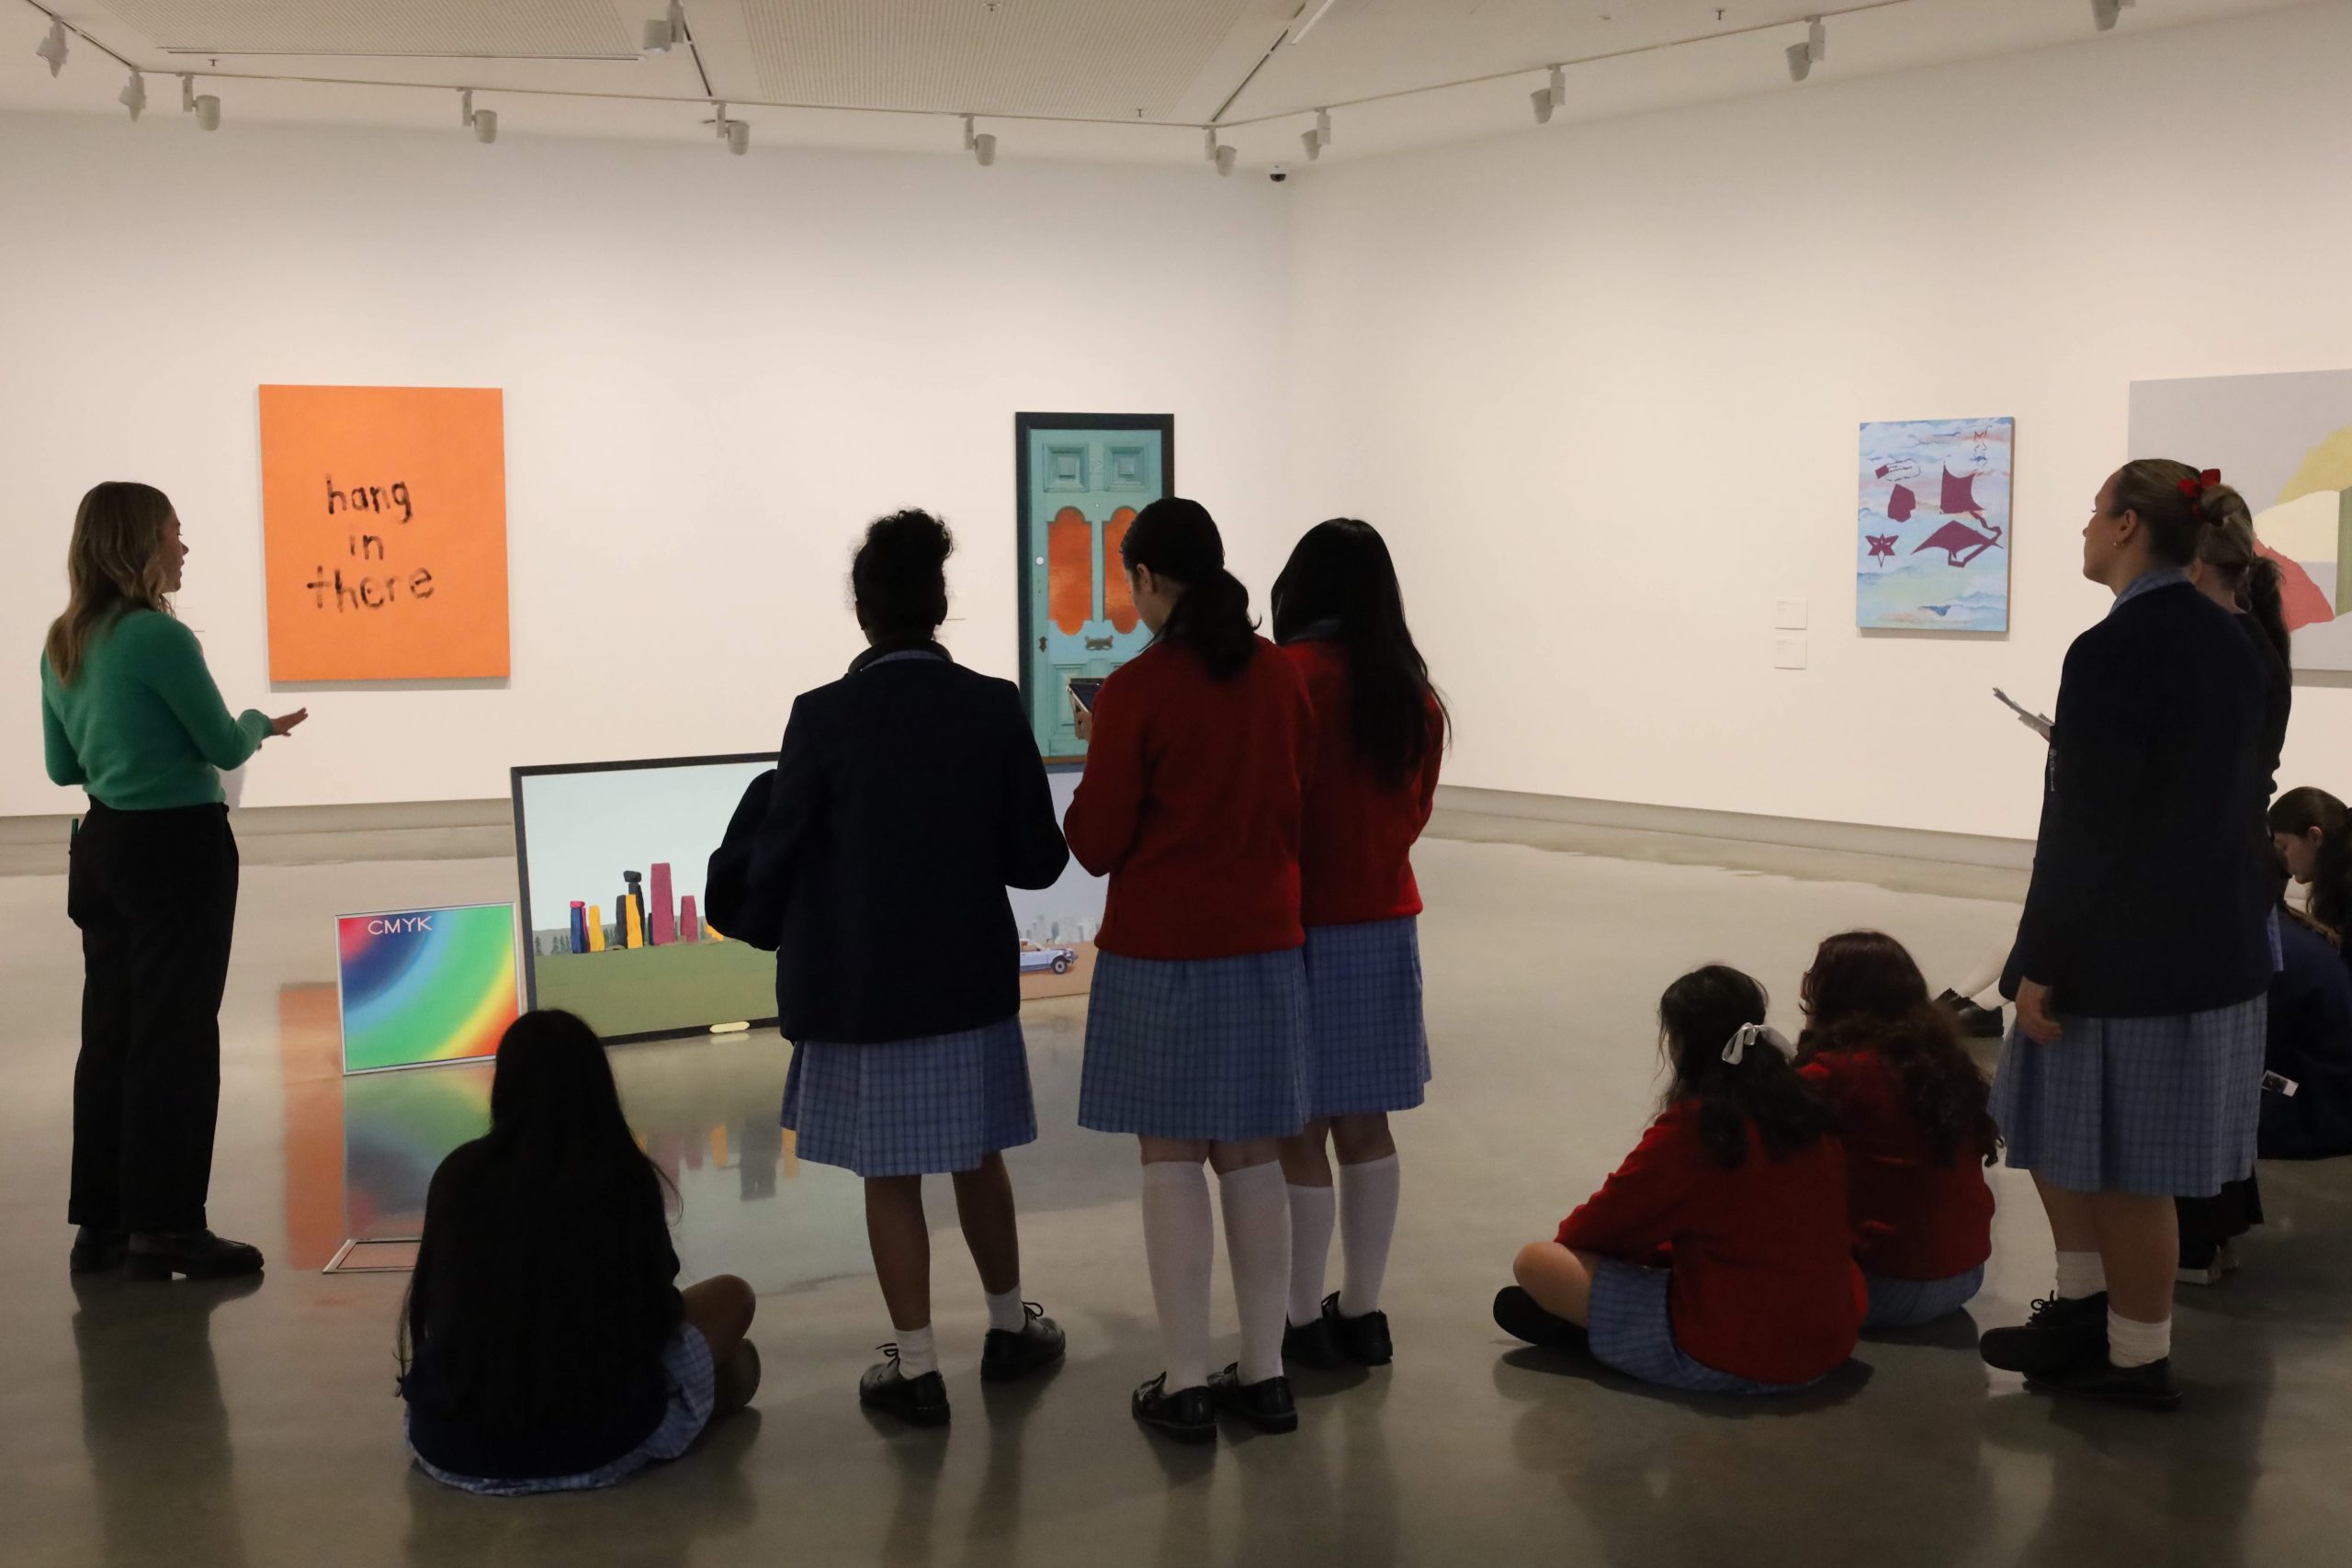 Students listen to a facilitator on a tour in Nadine Christensen's exhibitions of paintings.